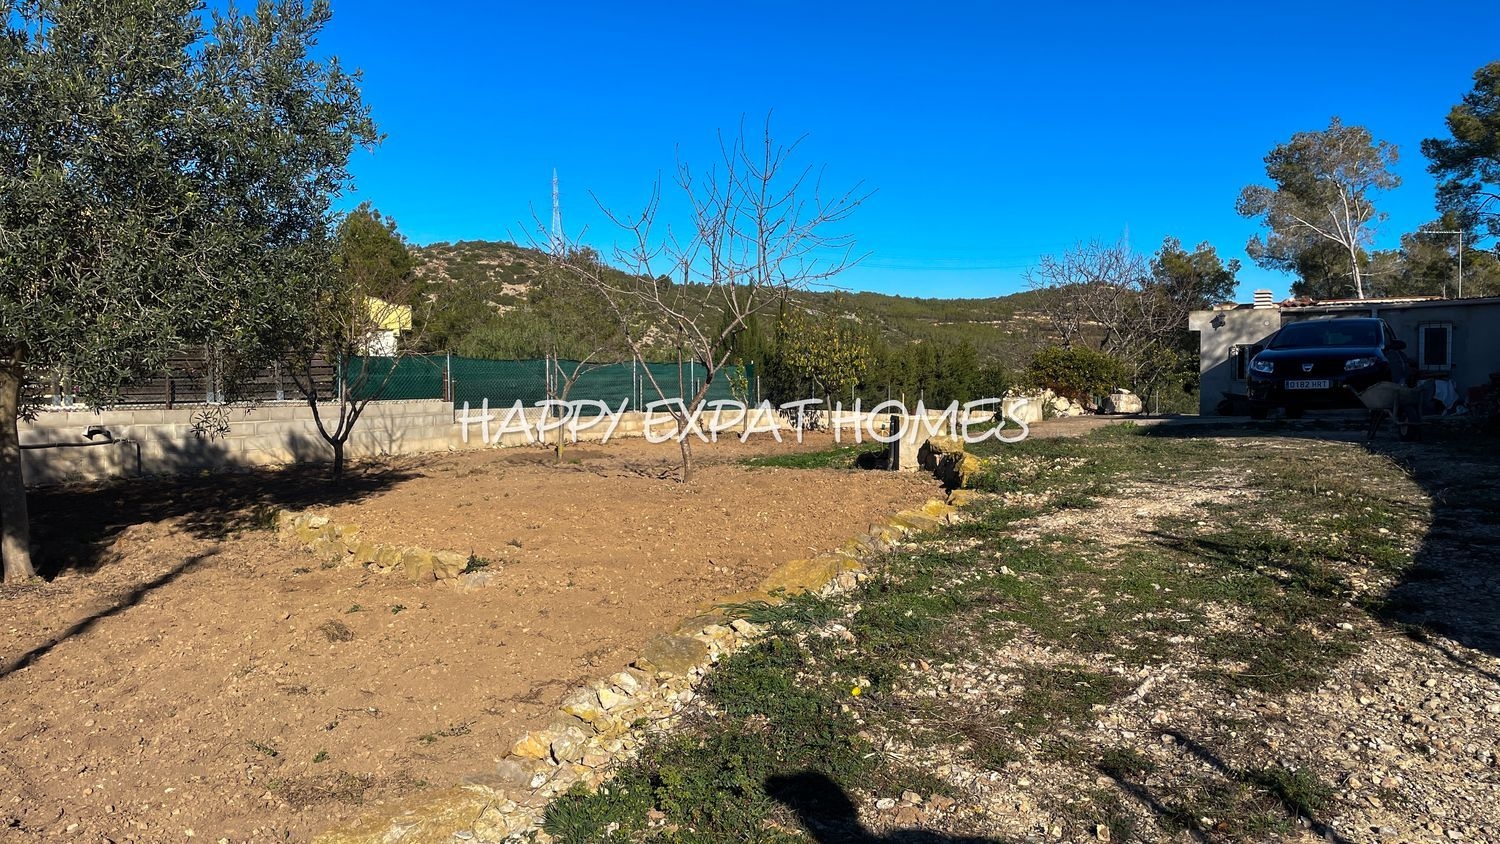 Lovely flat plot with stunning views of the mountains